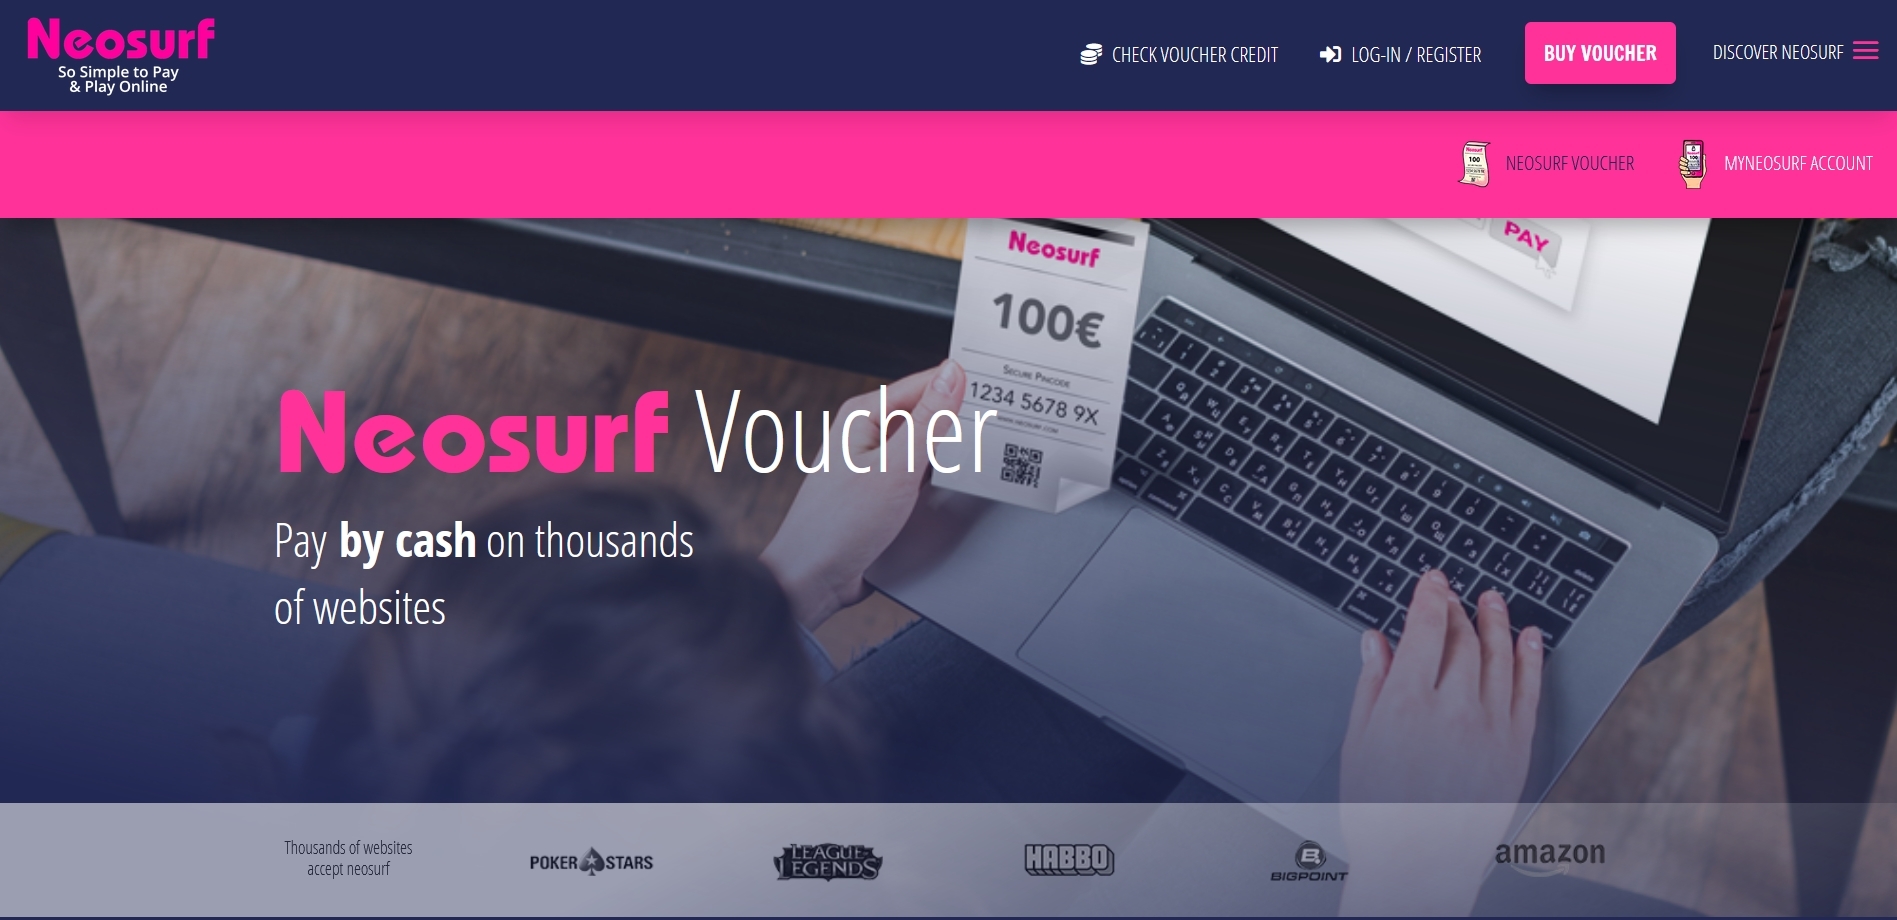 Neosurf €30 Gift Card BE